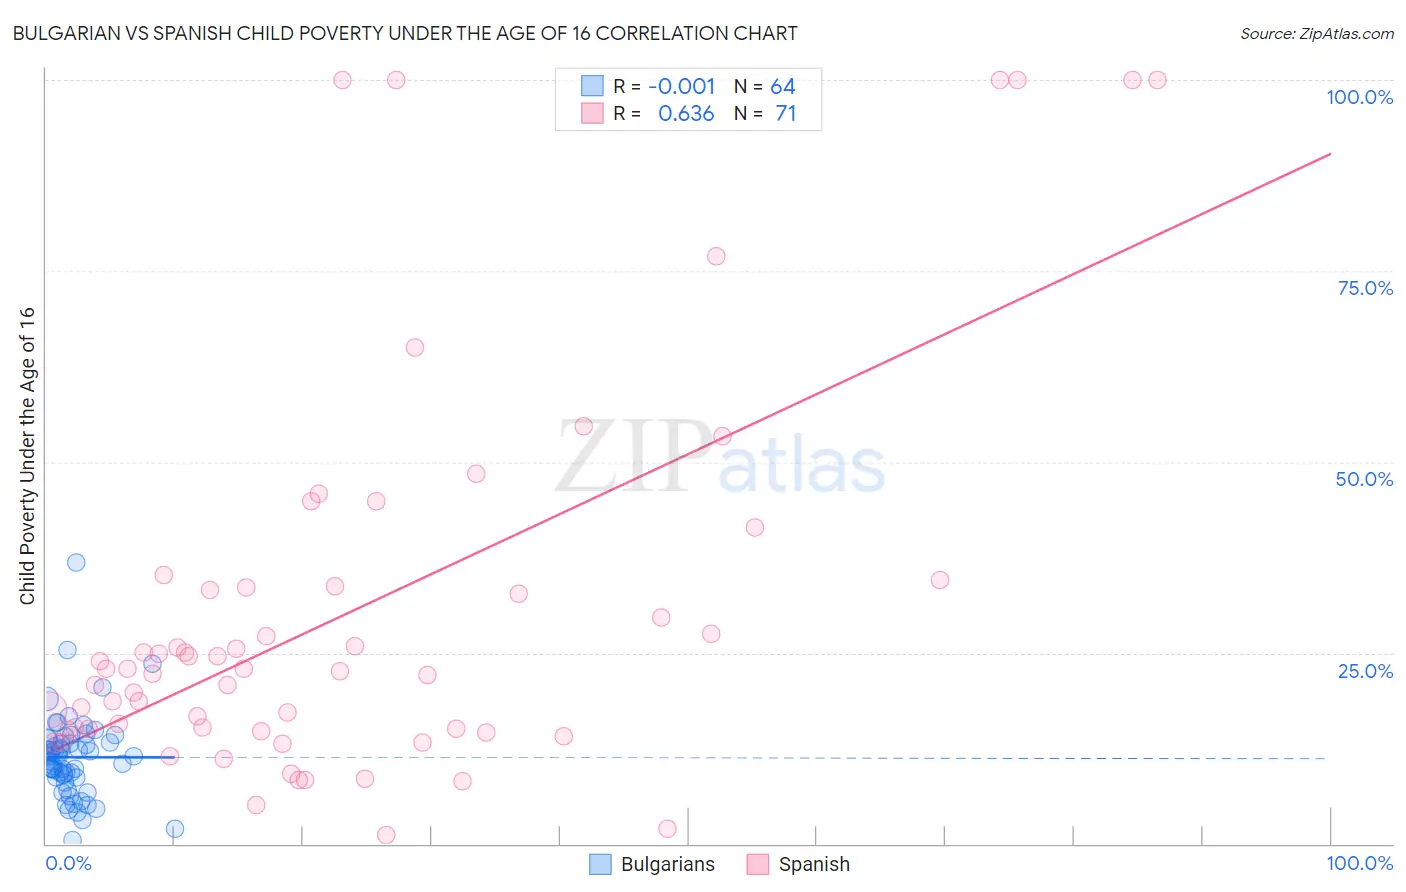 Bulgarian vs Spanish Child Poverty Under the Age of 16